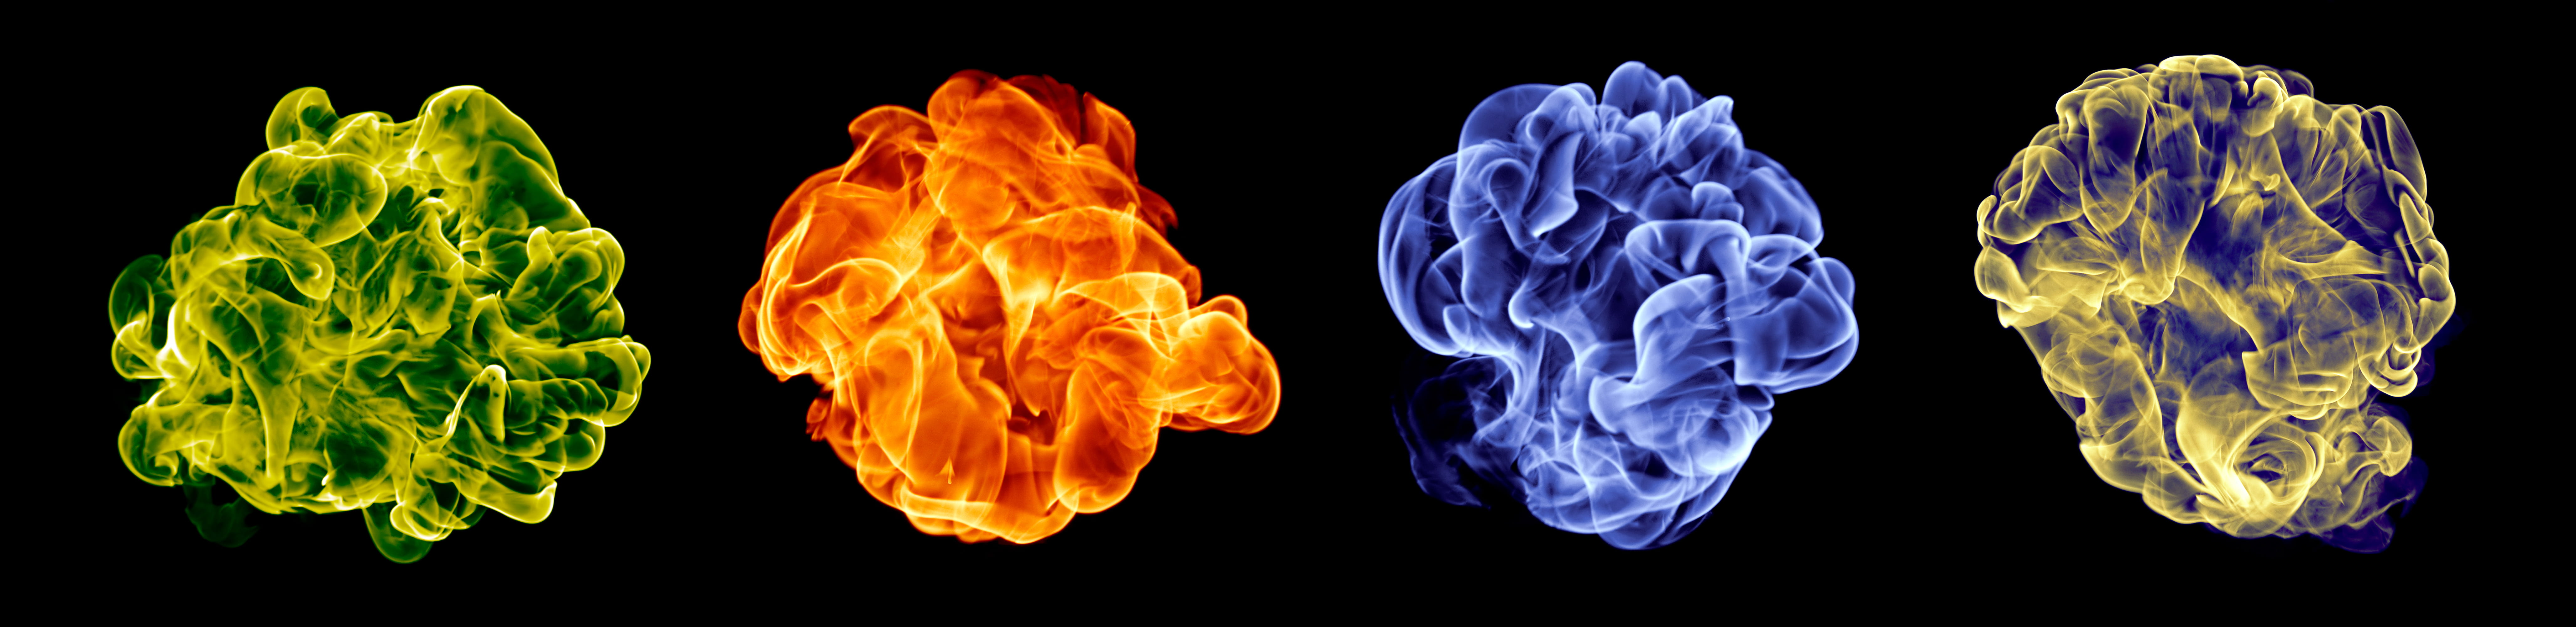 fireballs, explode, explosion, flame, heat, hot, abstract, background